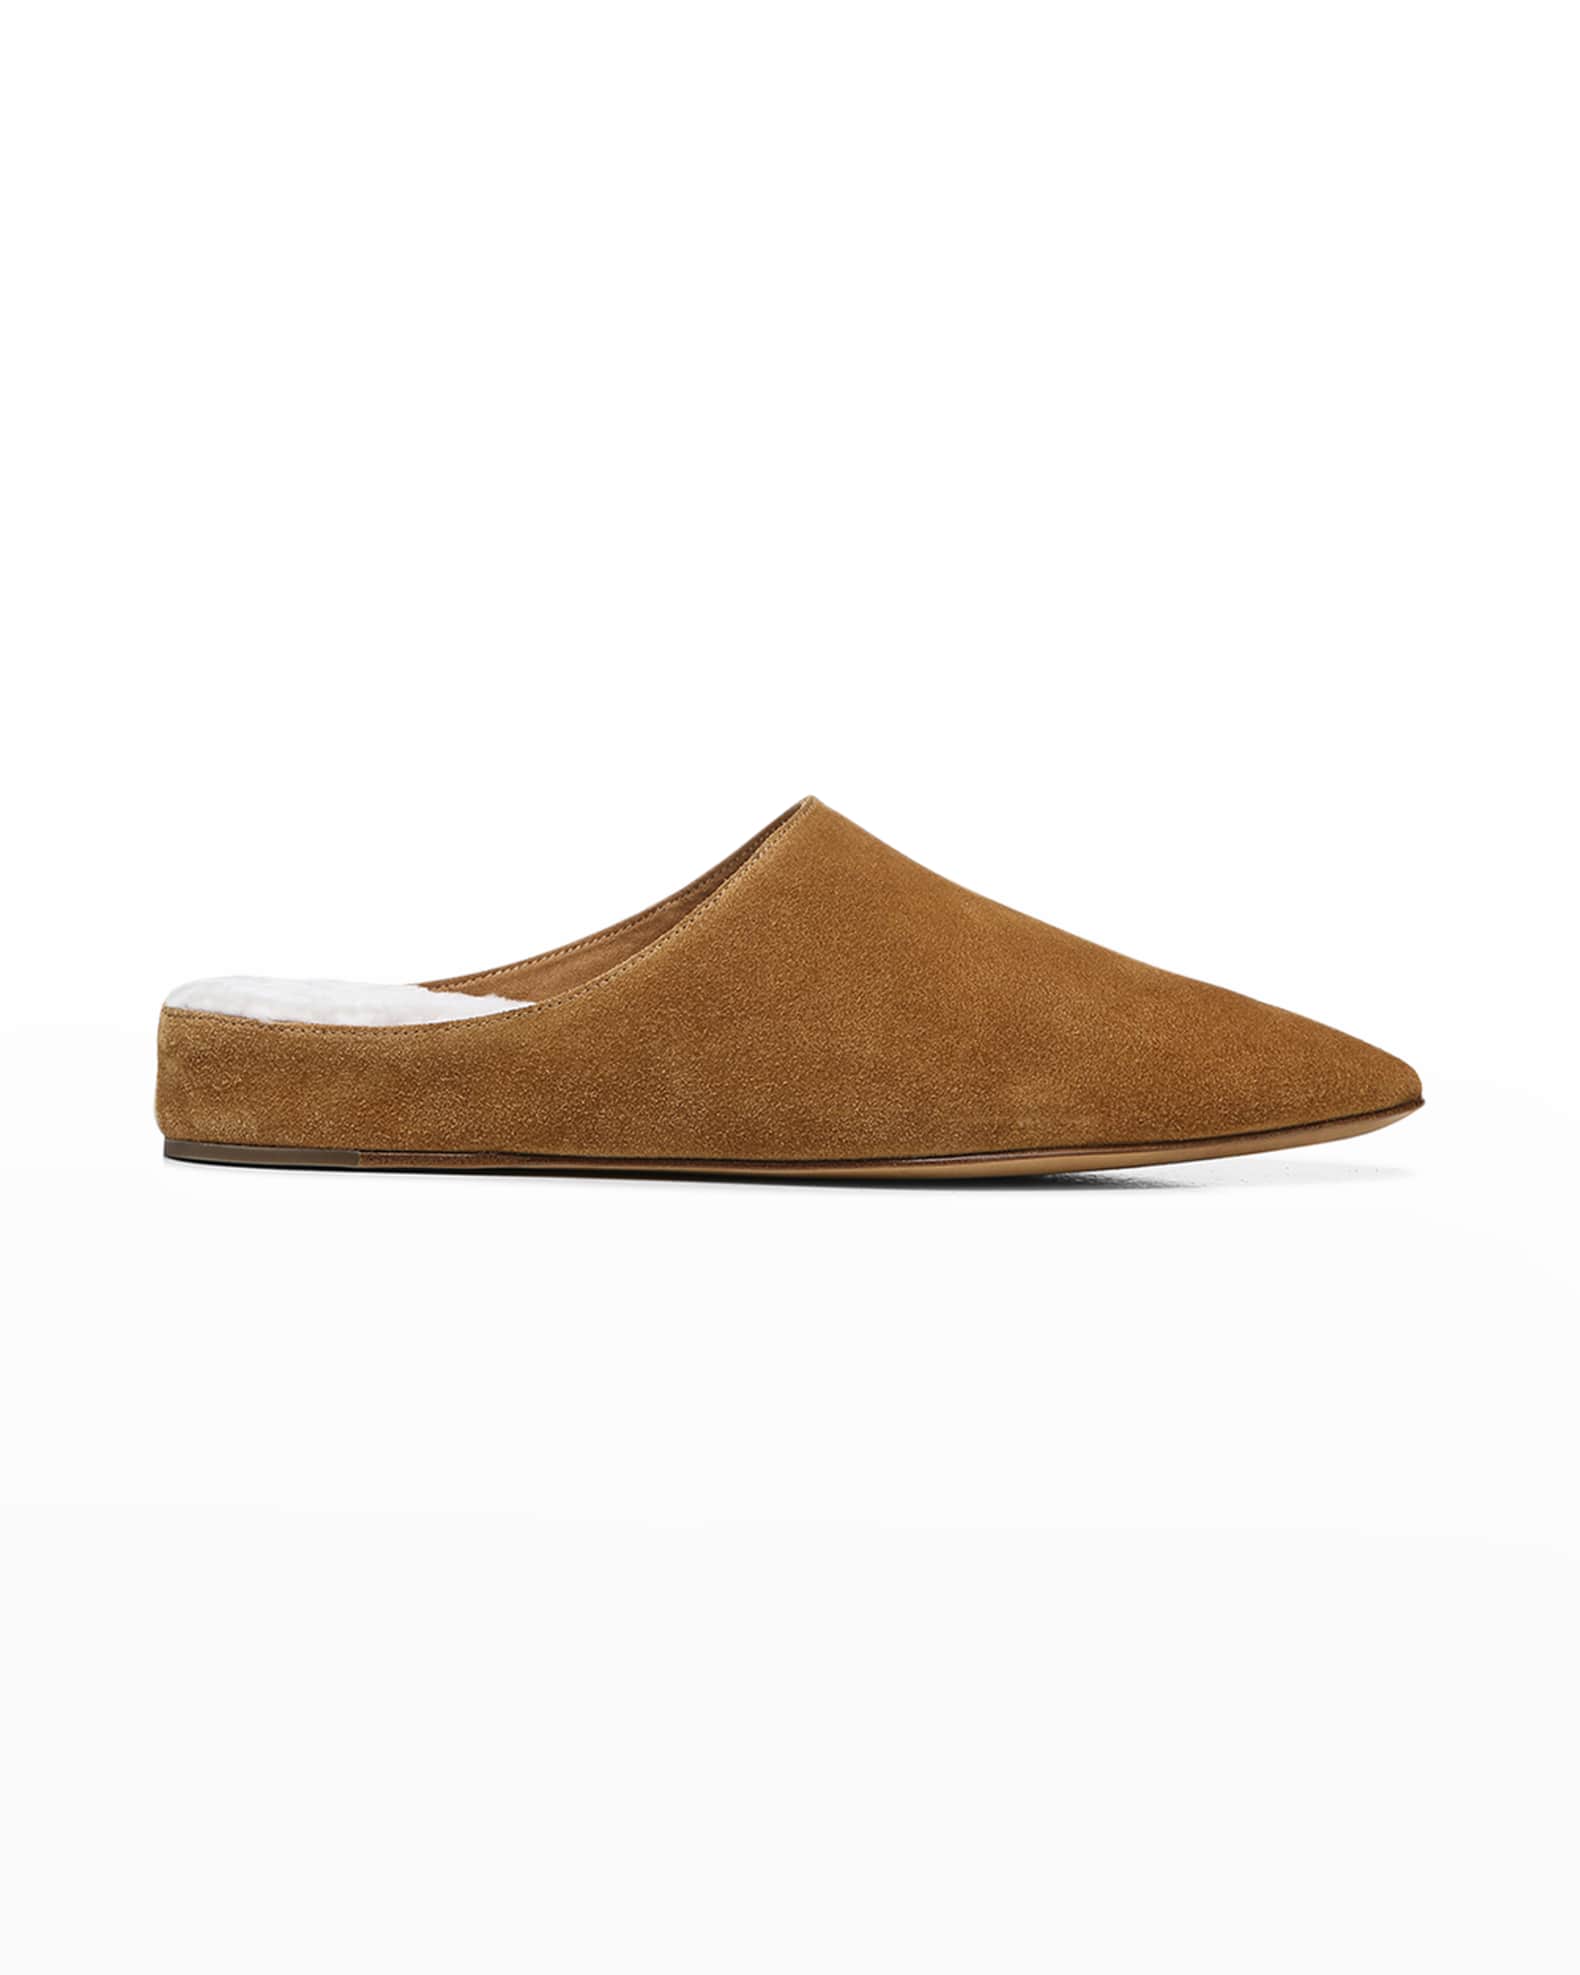 Vince Suede Shearling Ballerina Mules | Neiman Marcus